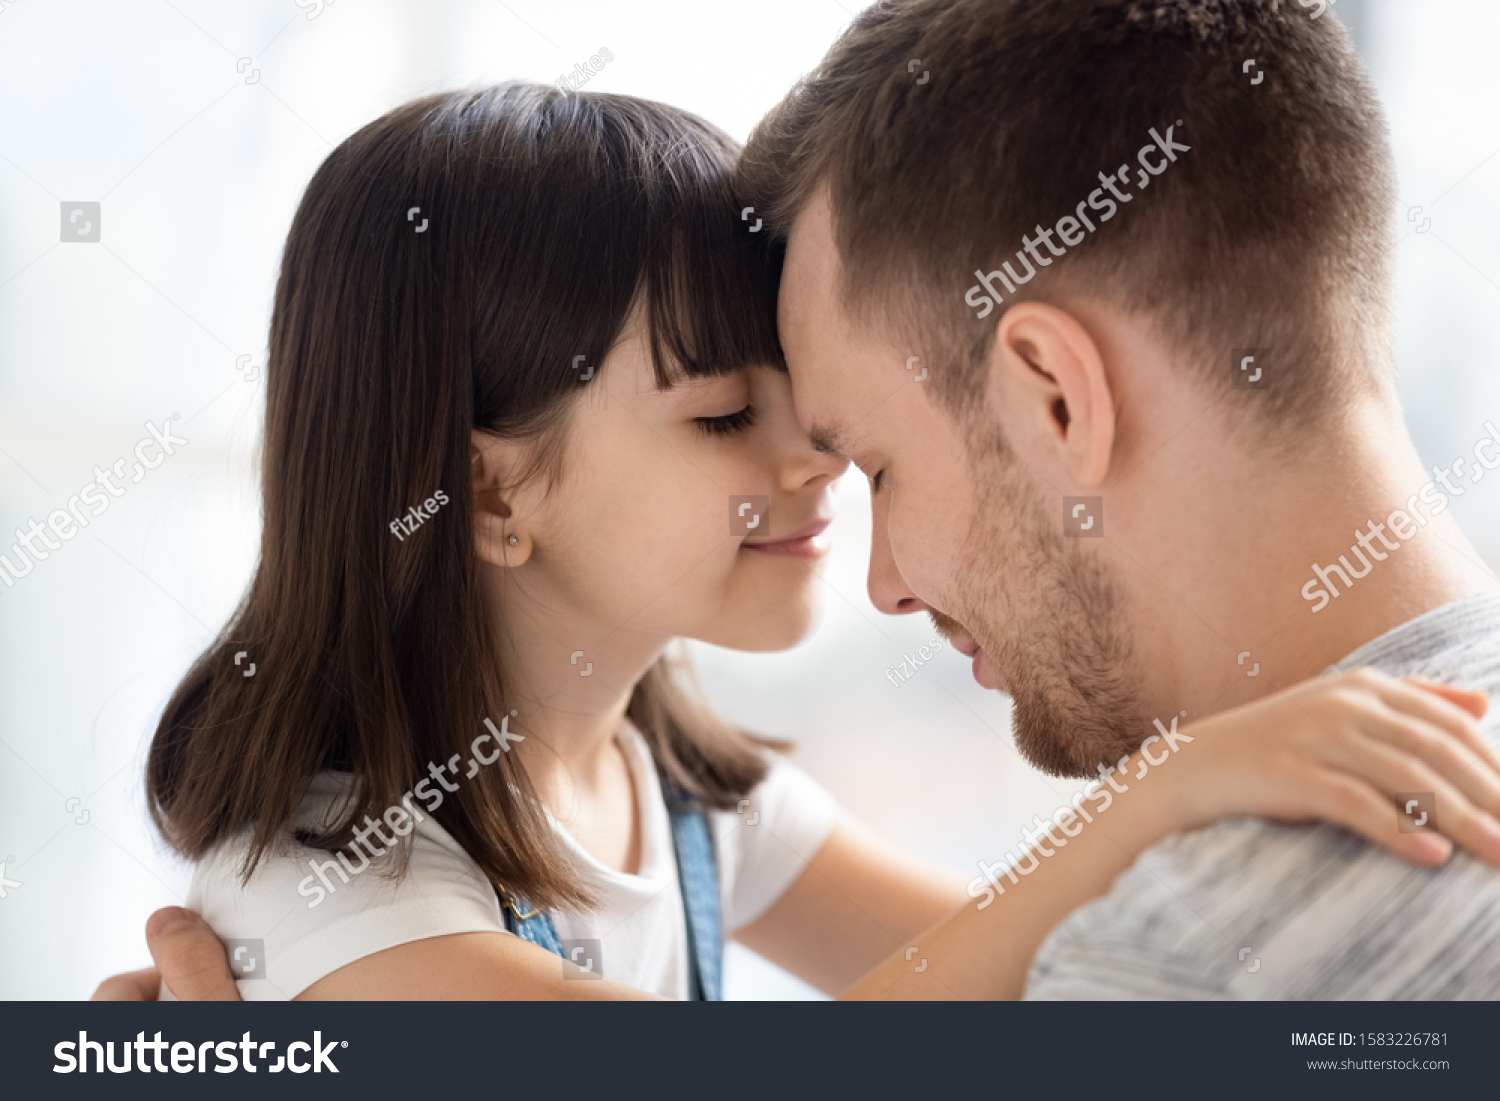 Close up lovely daughter and happy father touching foreheads. Smiling little girl with closed eyes embracing dad expressing love and care. Good family relations concept. #1583226781